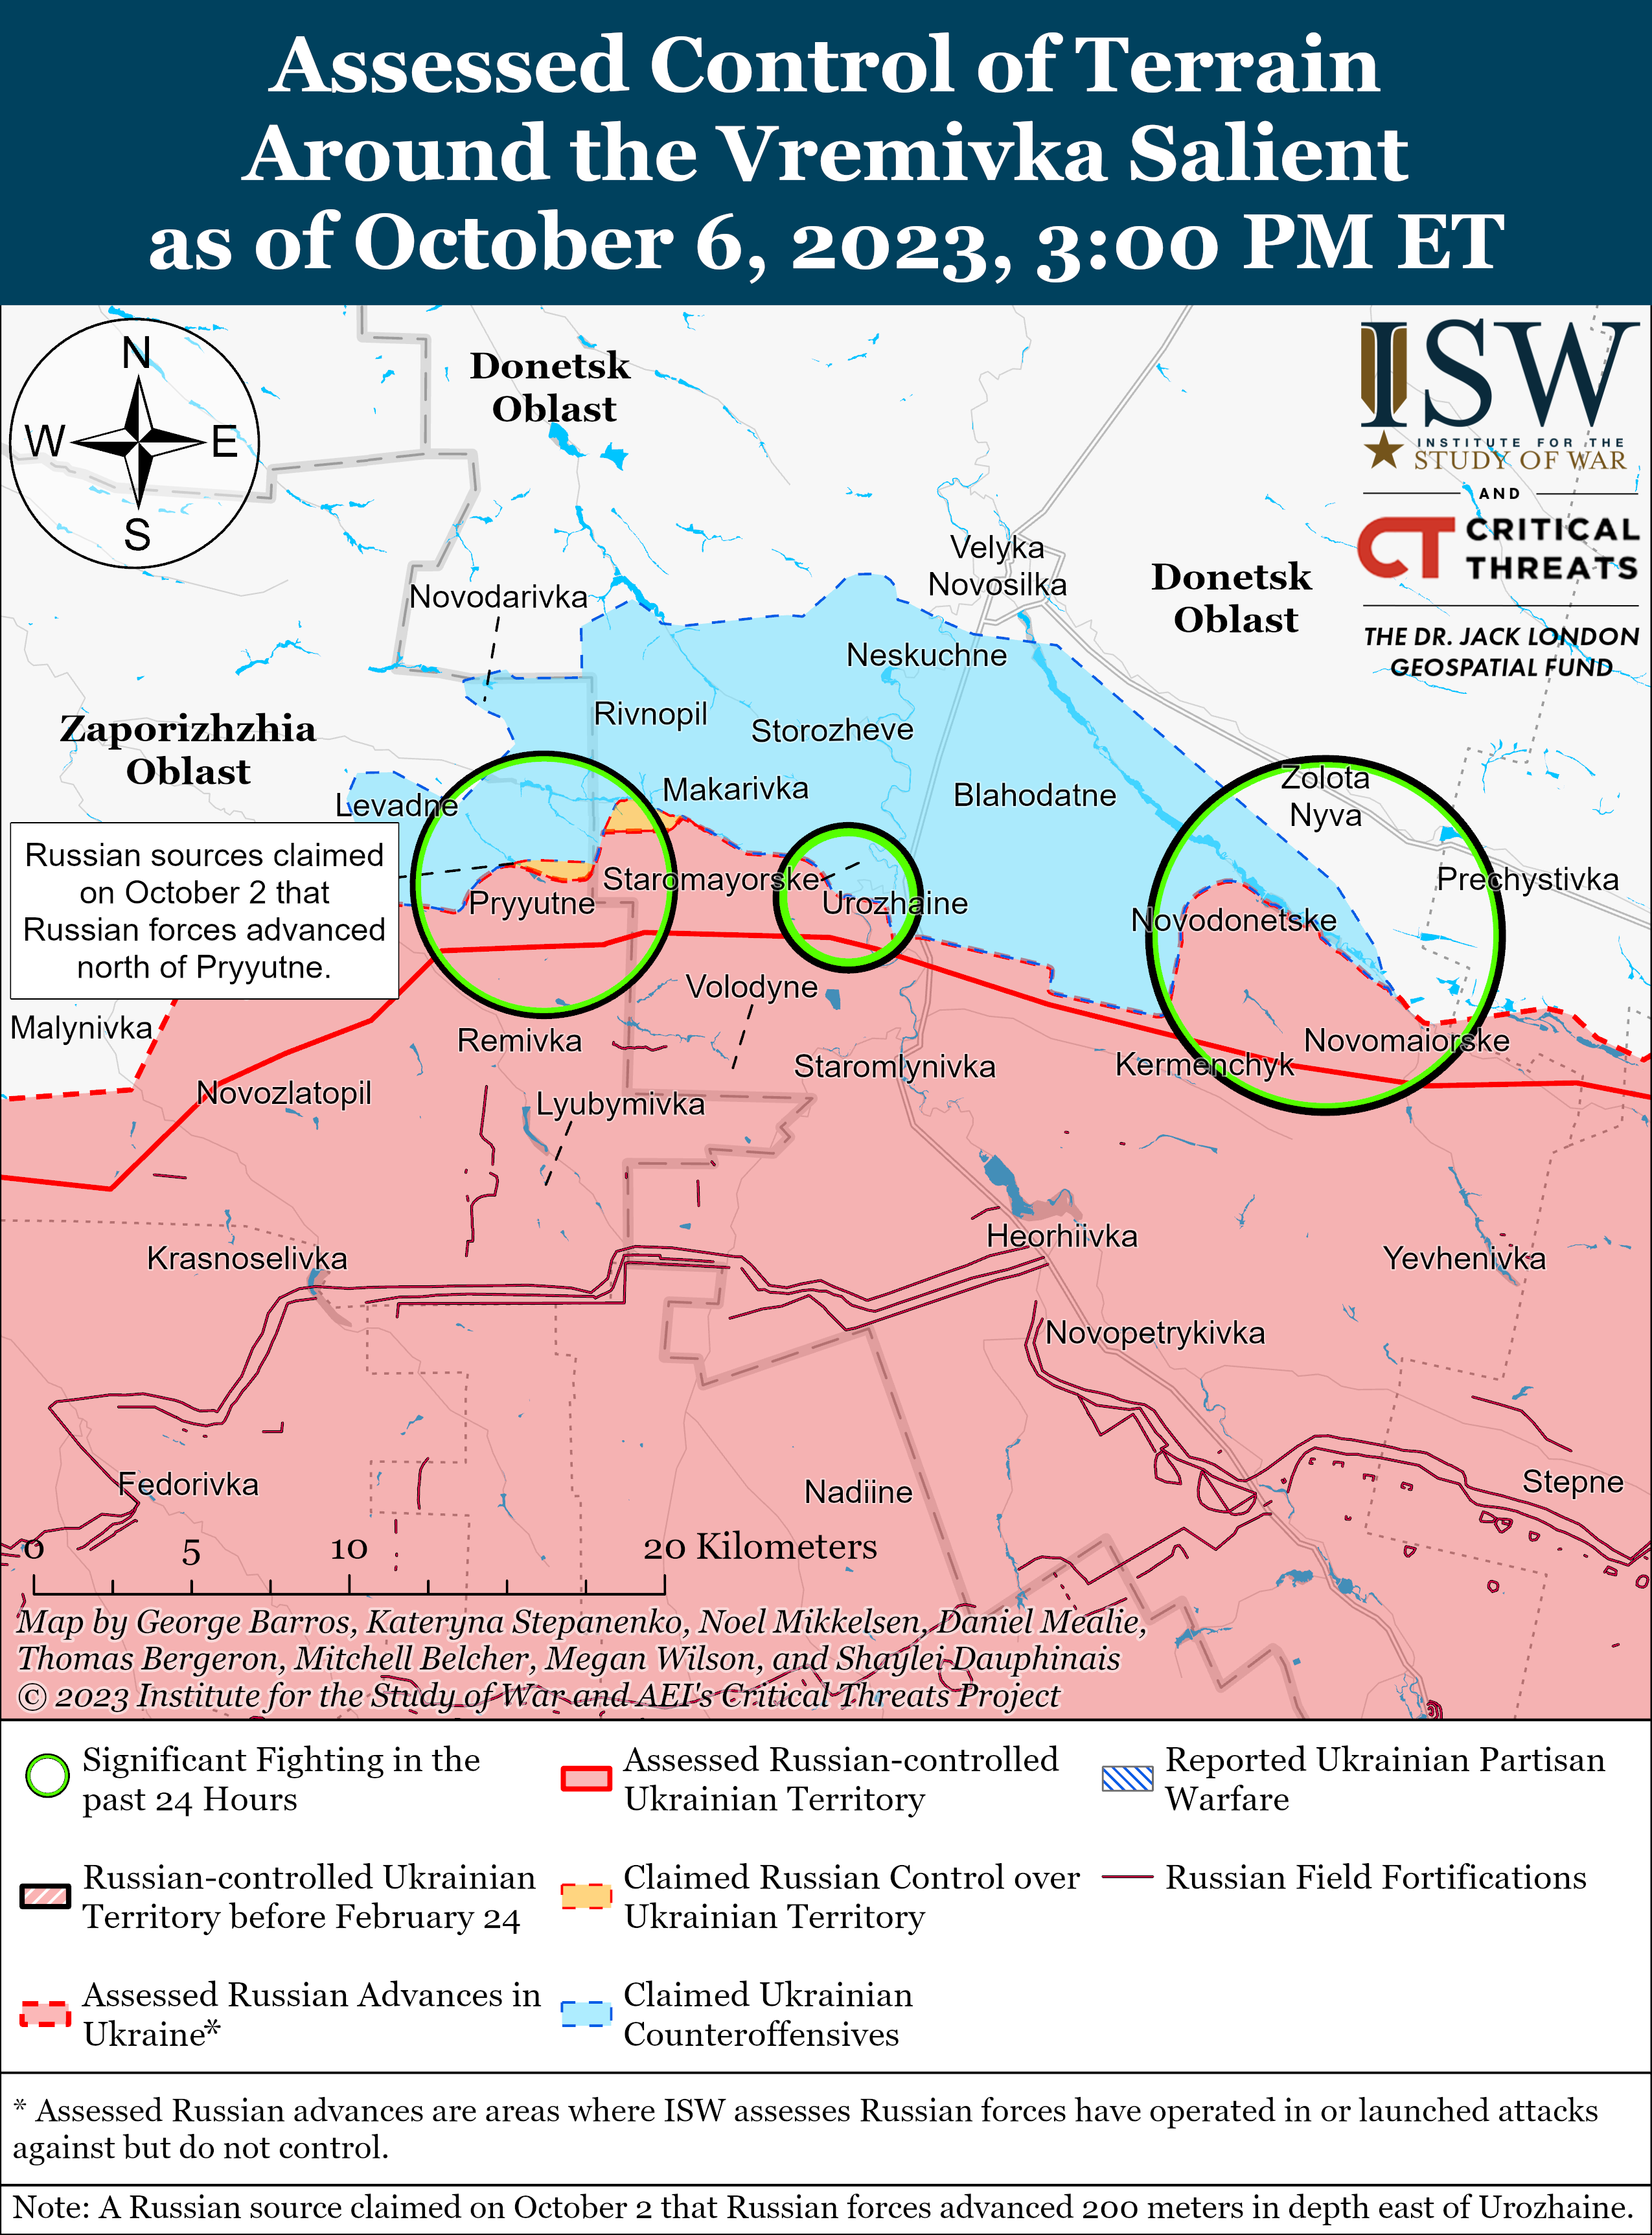 Russian Offensive Campaign Assessment, February 27, 2023